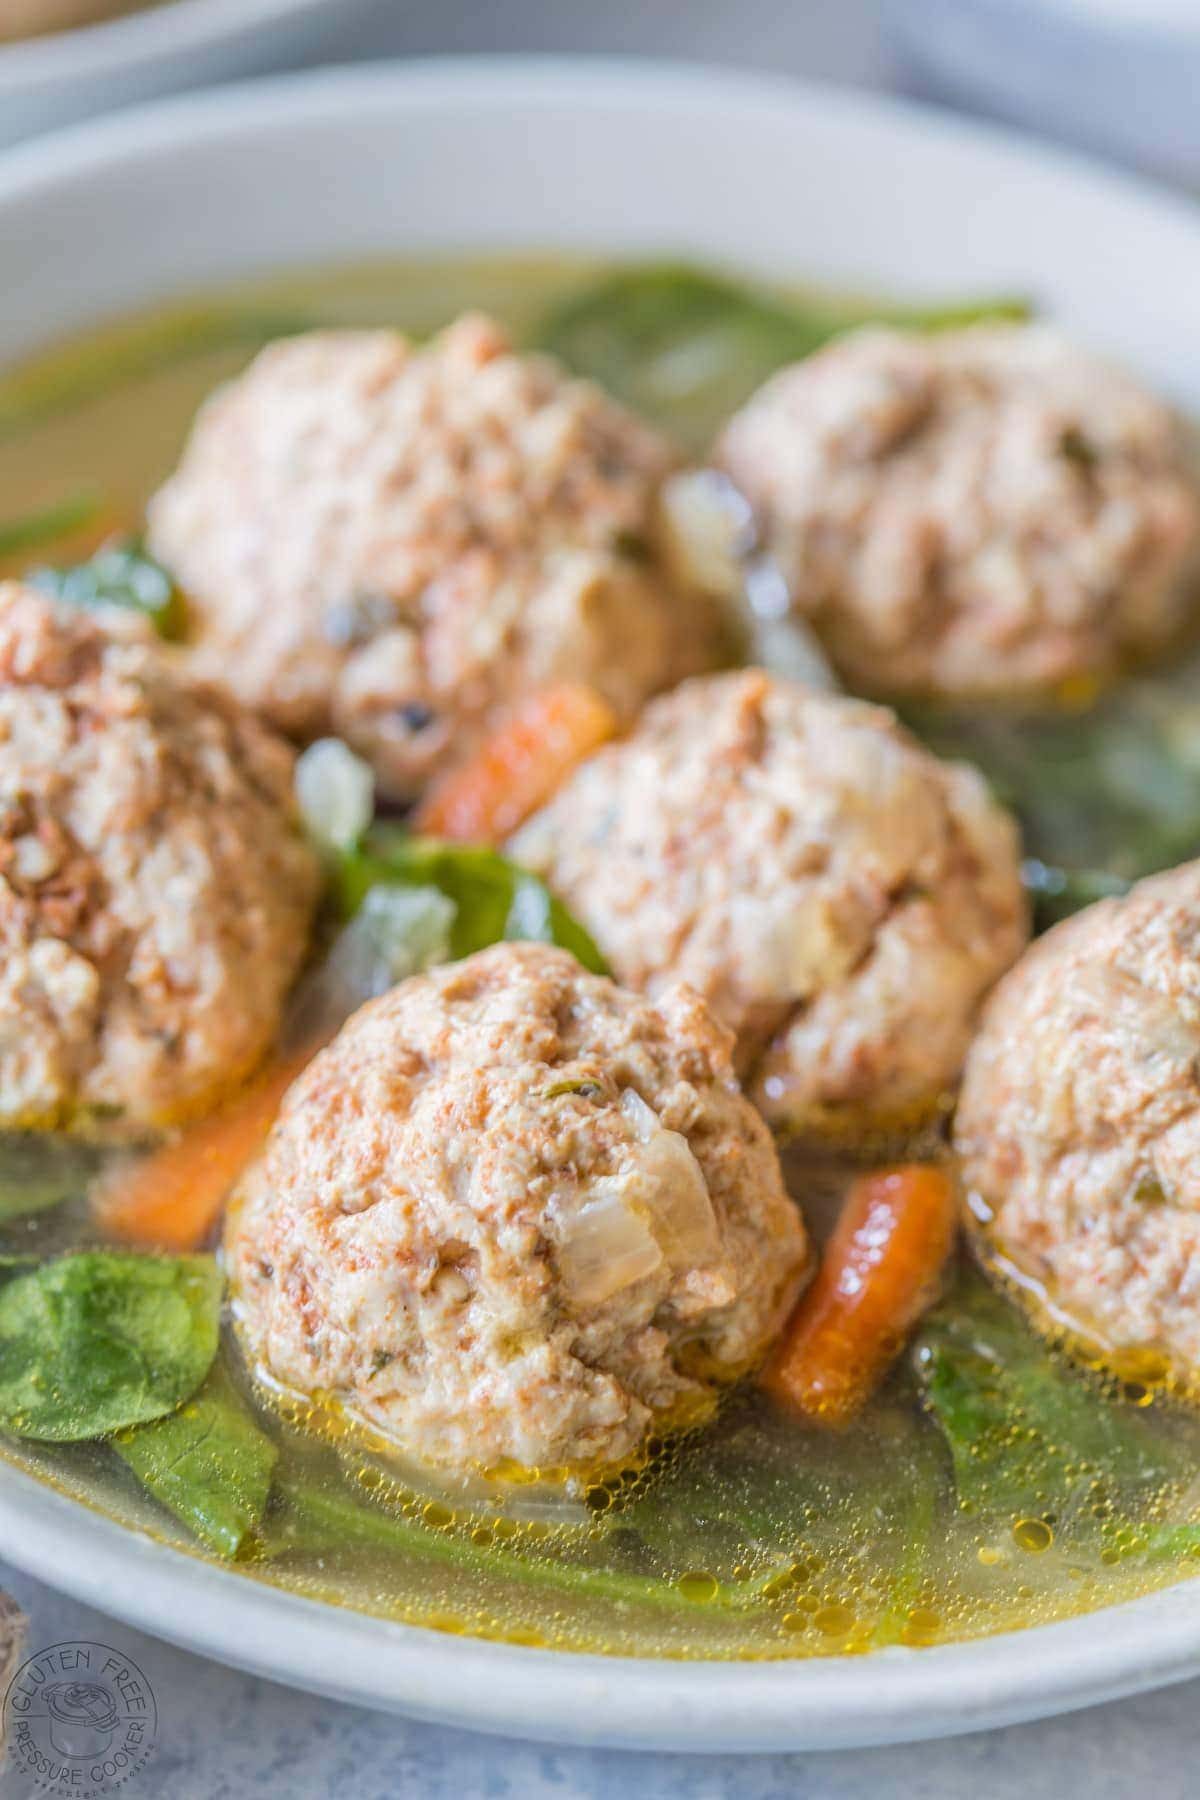 Pressure Cooker Italian Wedding Soup, this recipe is gluten free, paleo, Whole30, low carb and healthy, and is perfect to make in your Instant Pot or any other electric pressure cooker!